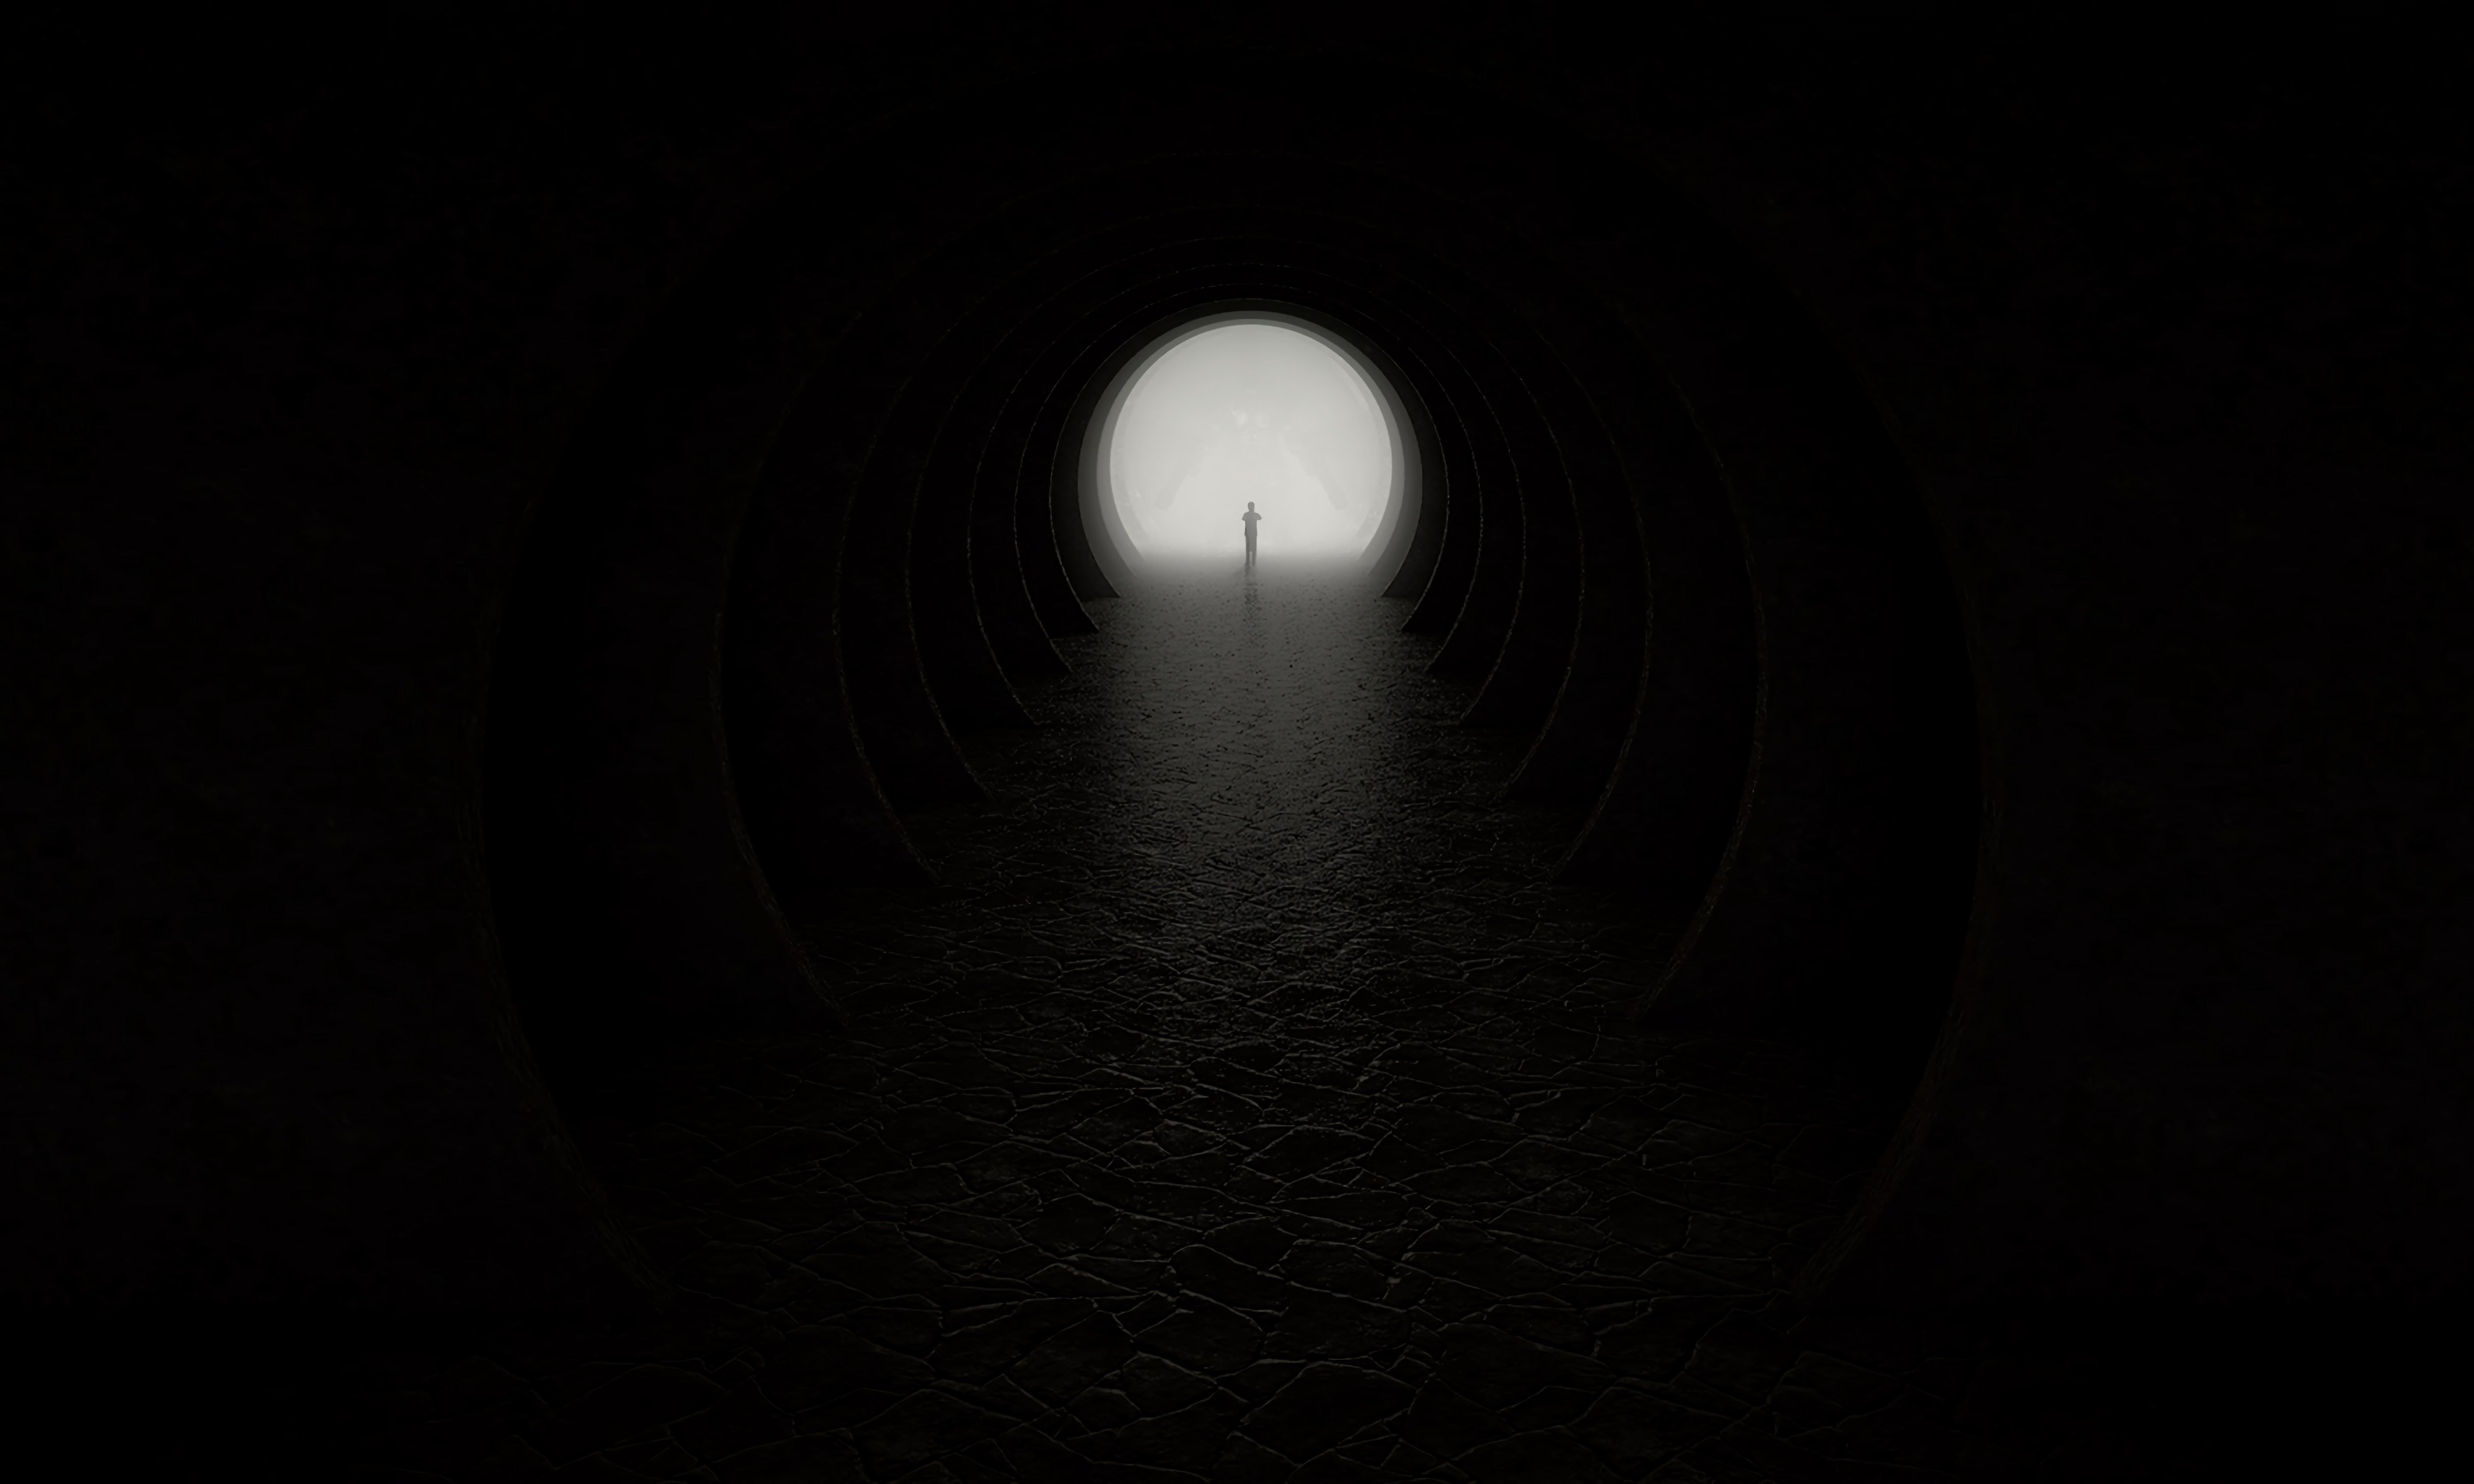 black, silhouette, darkness, circle, cave, output, exit